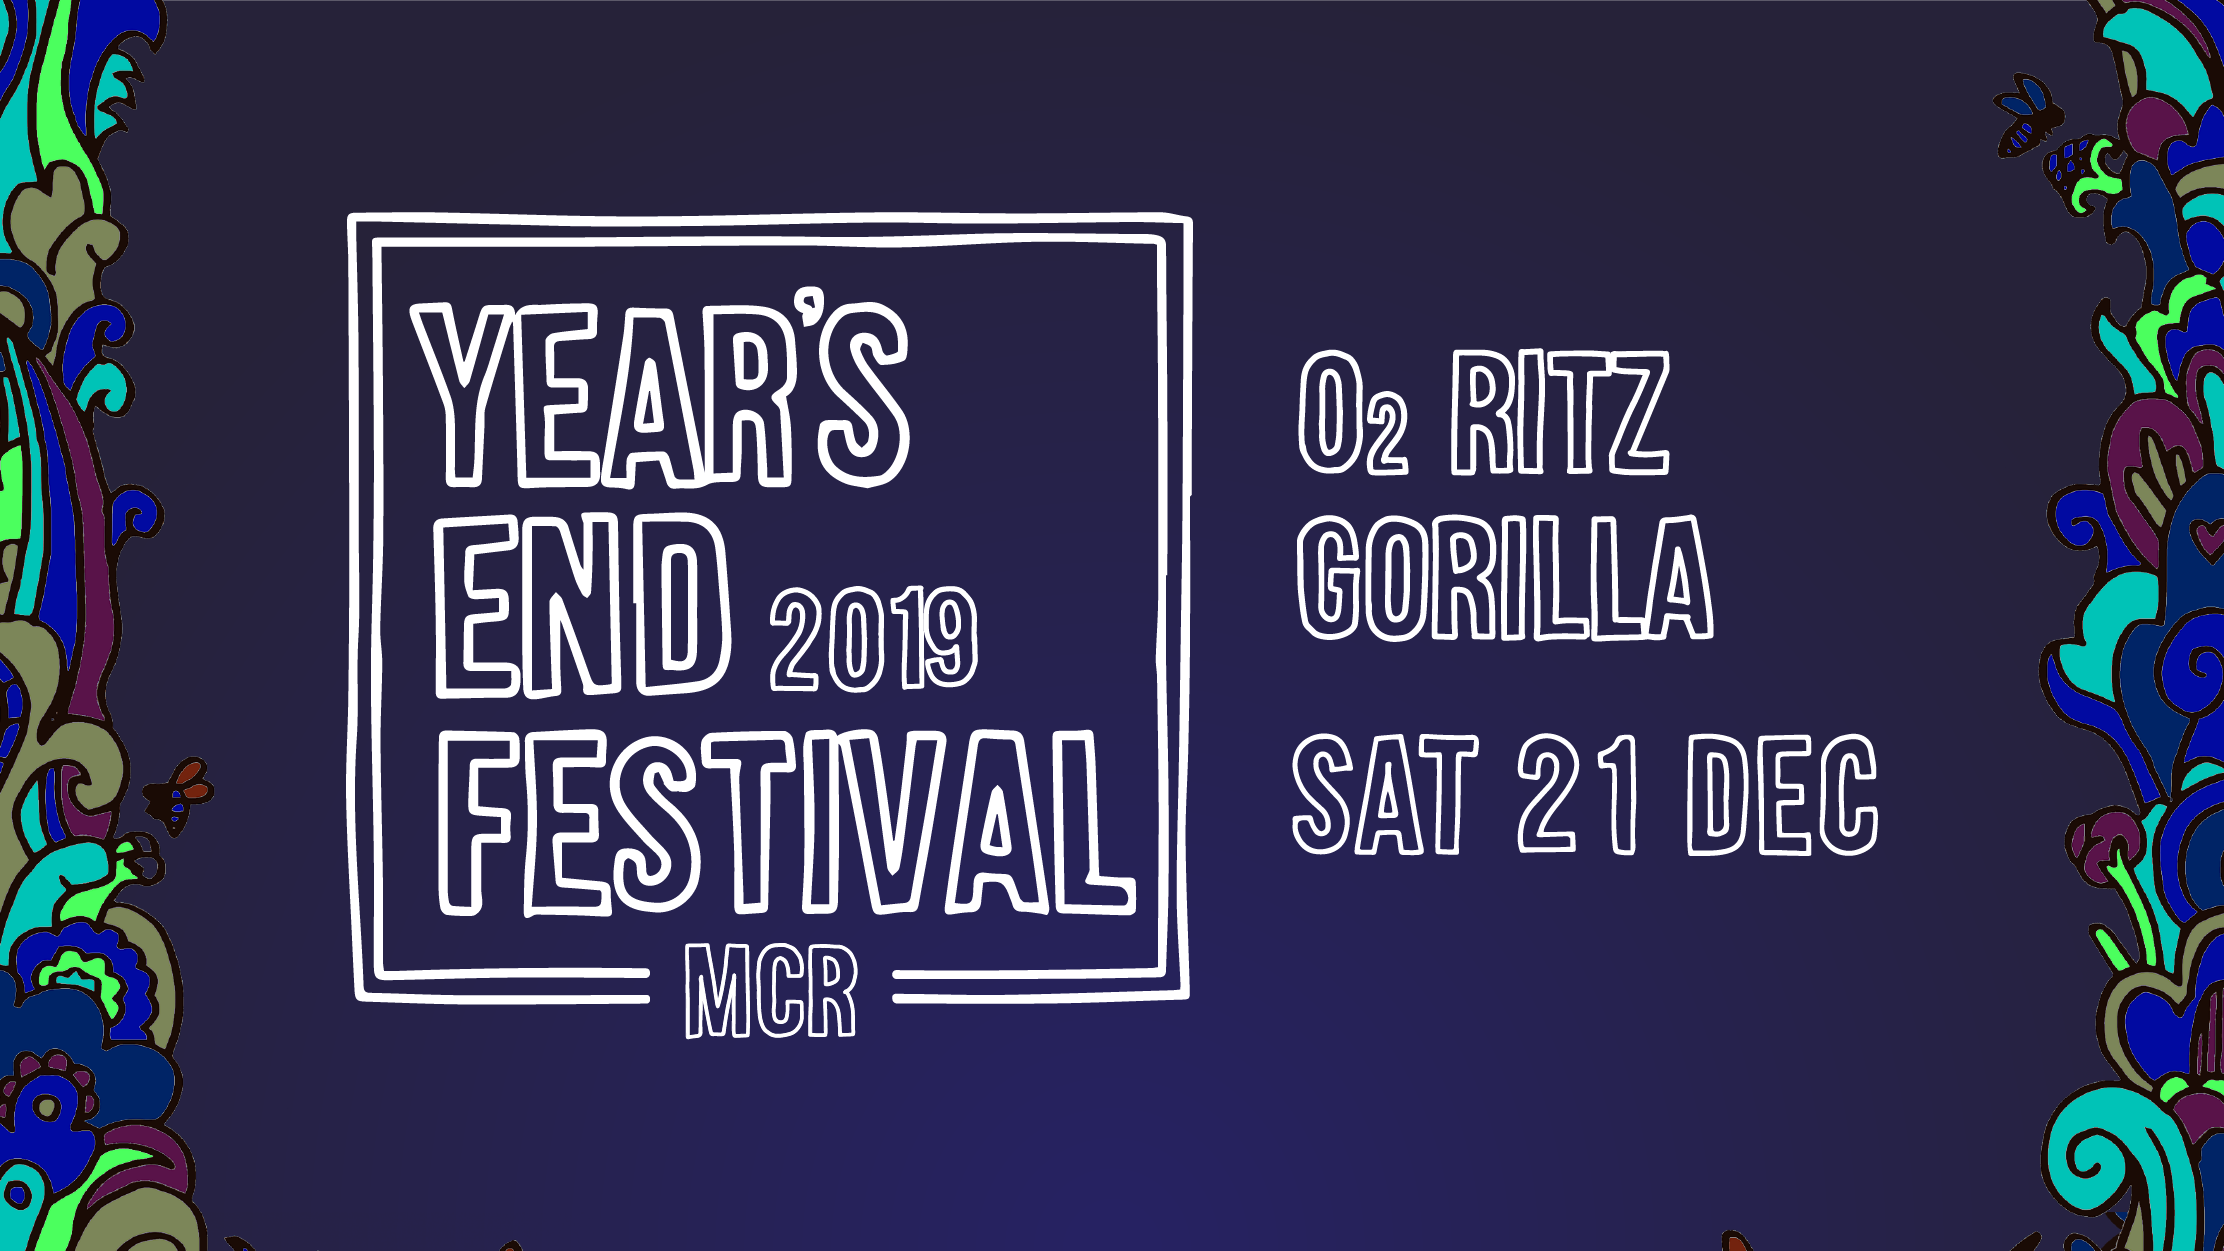 Year’s End Festival 2019